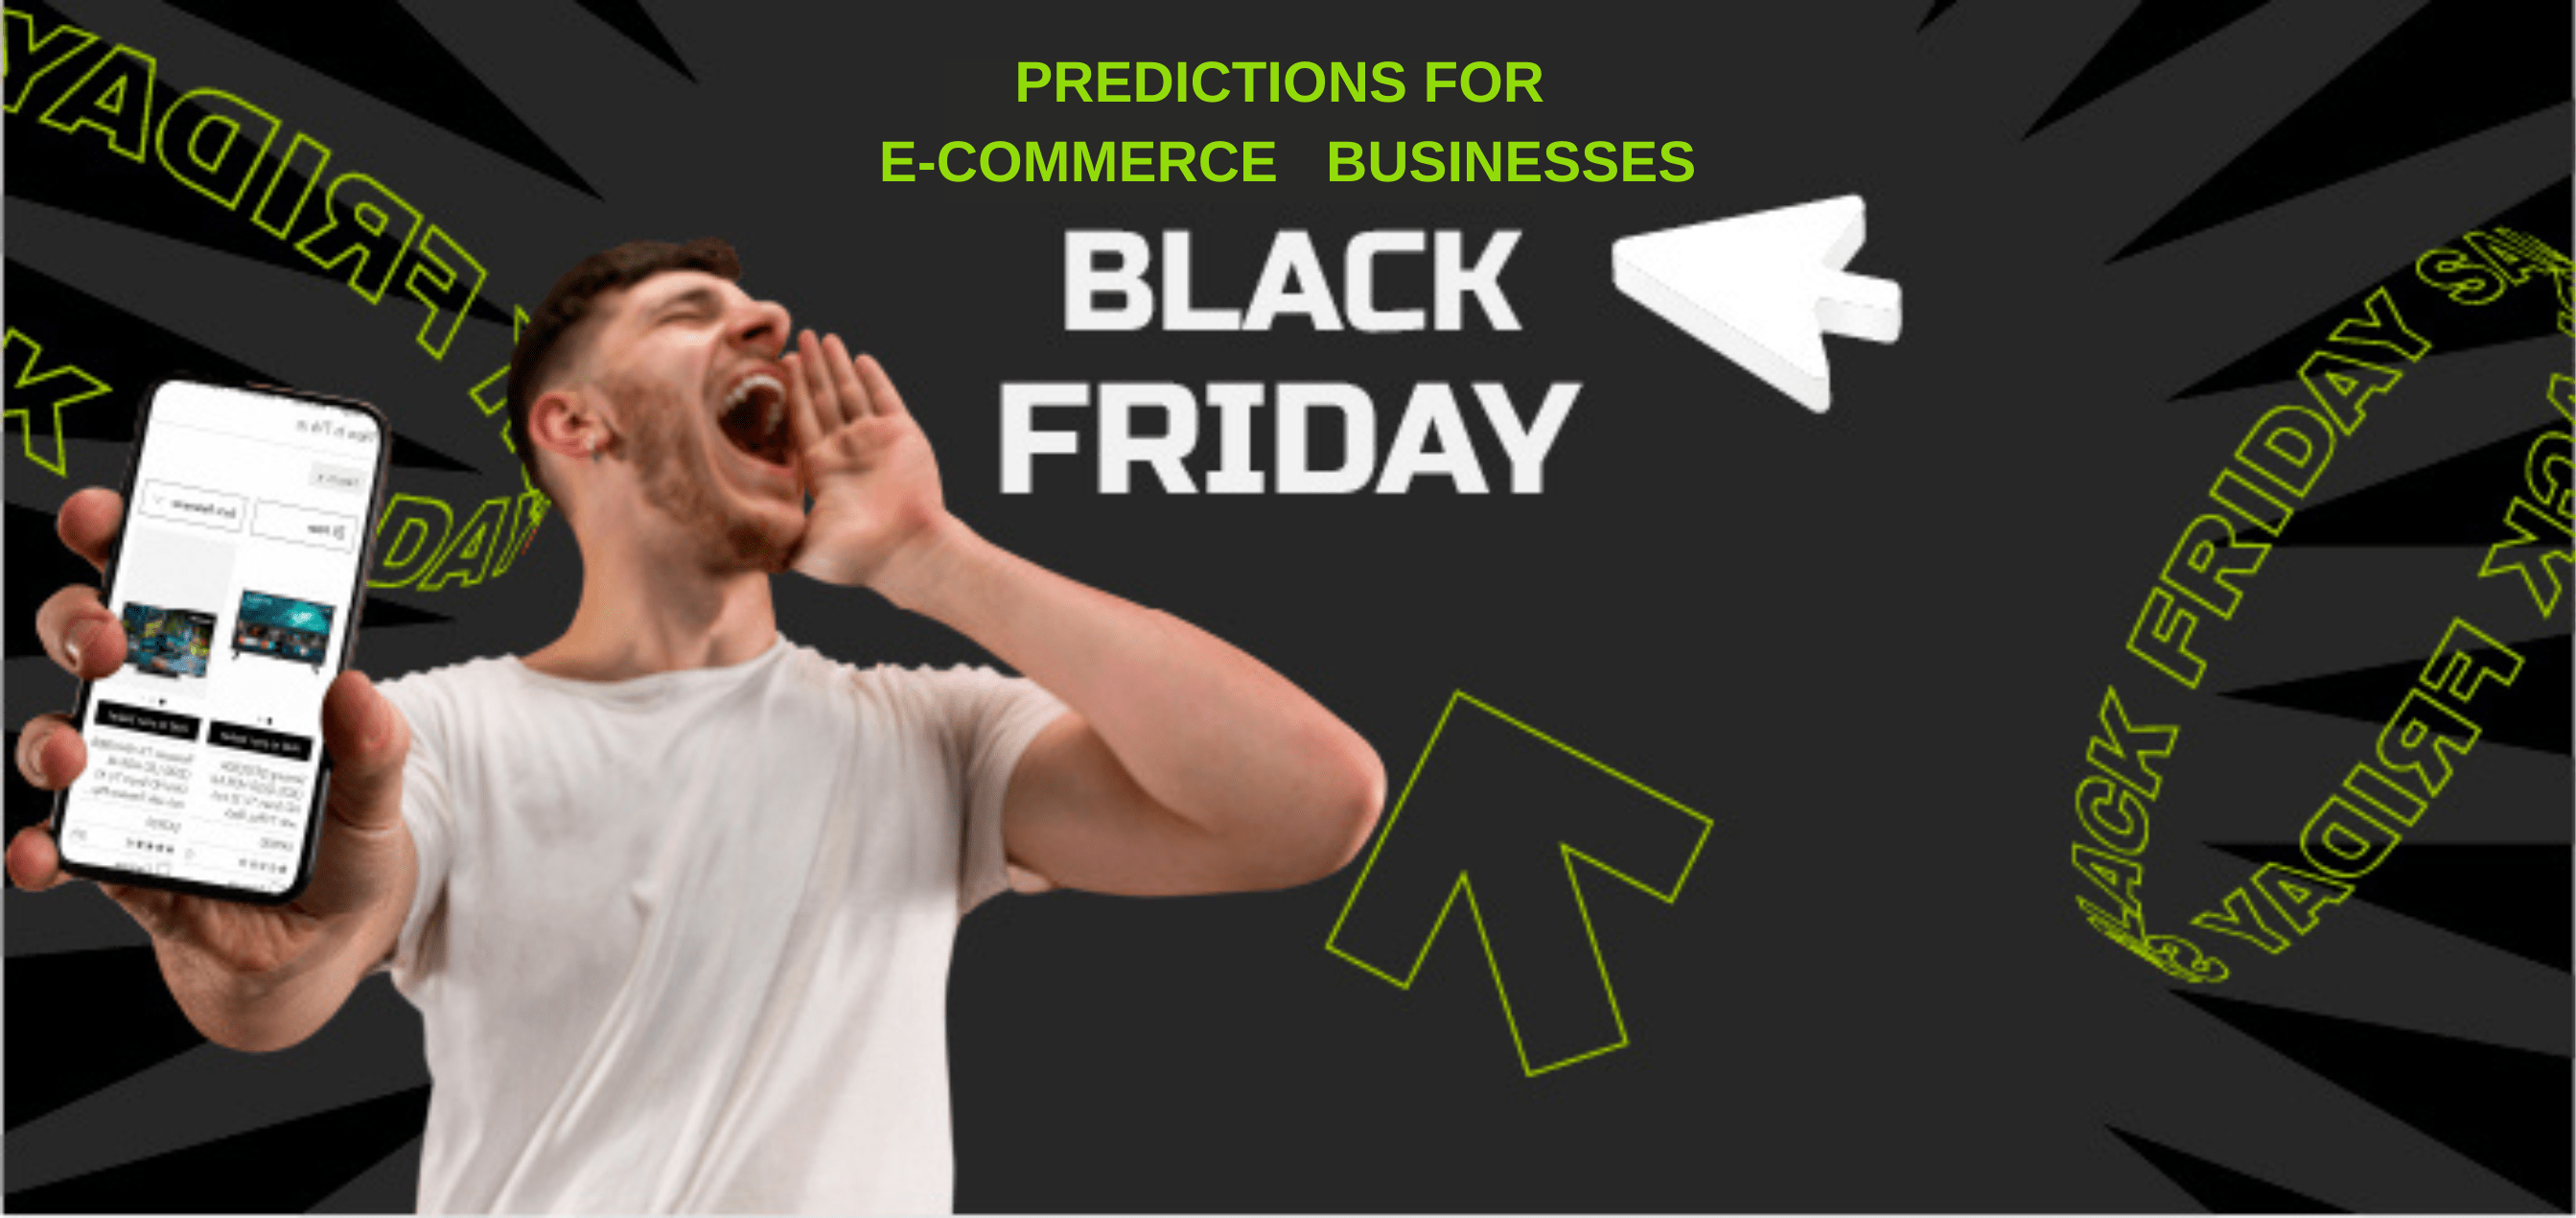 Black Friday predictions for e-commerce businesses